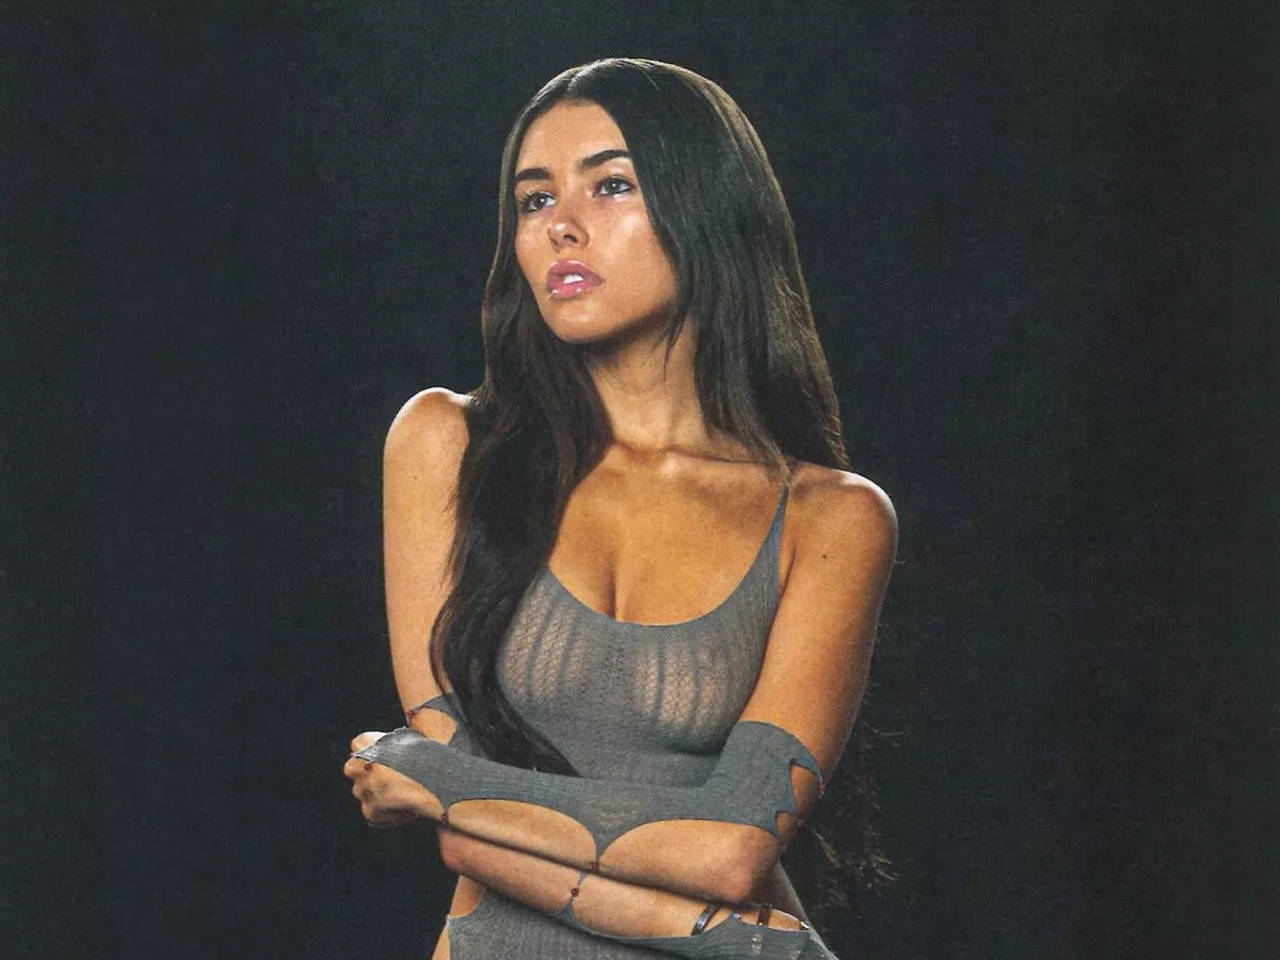 Madison Beer reveals the unpleasant feelings she went through as a minor when her nude video was leaked online English Movie News